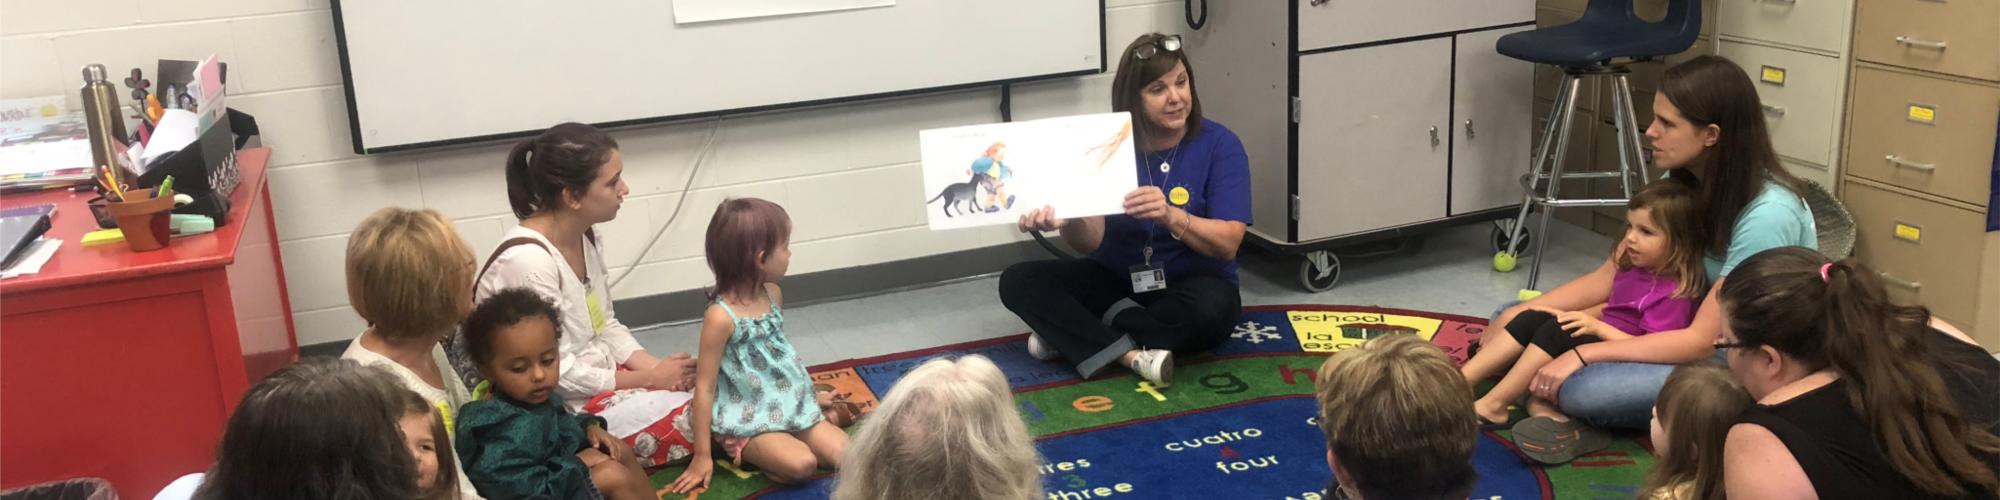 Preschool Pages teacher reading to children and caregivers